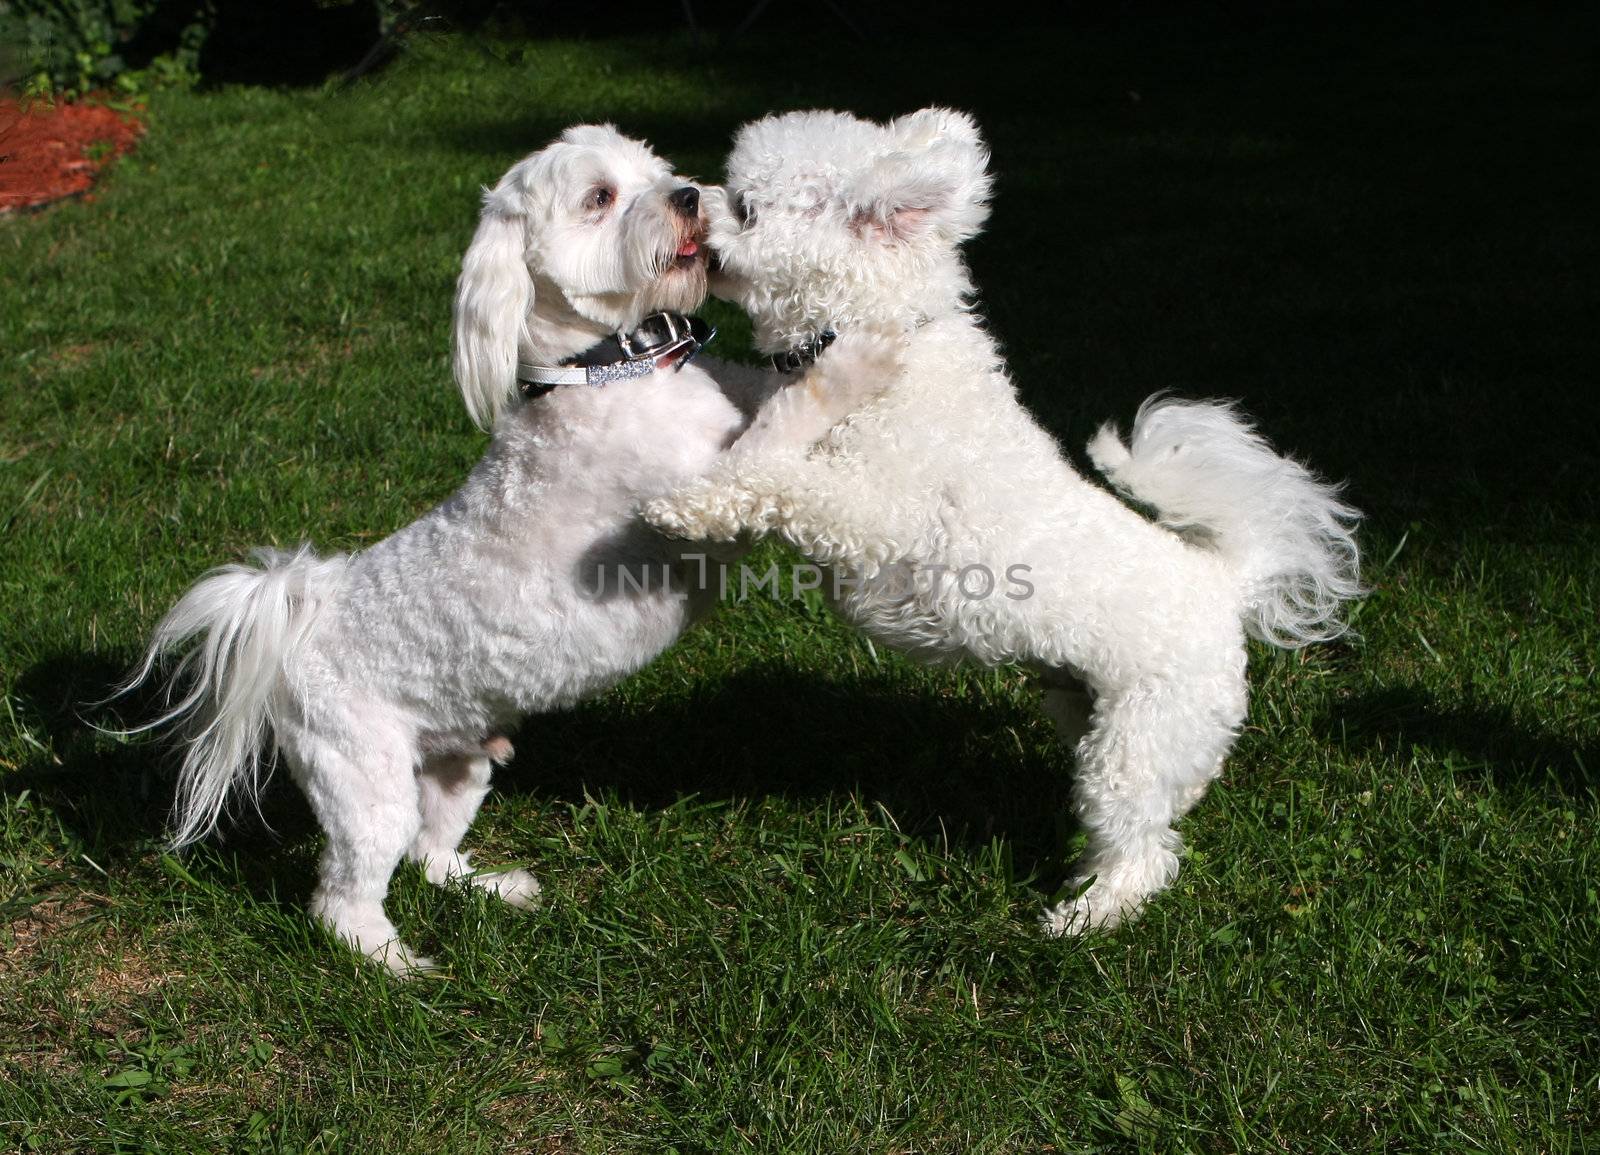 Bichon frise & Bichon mix dogs playing in afternoon sun